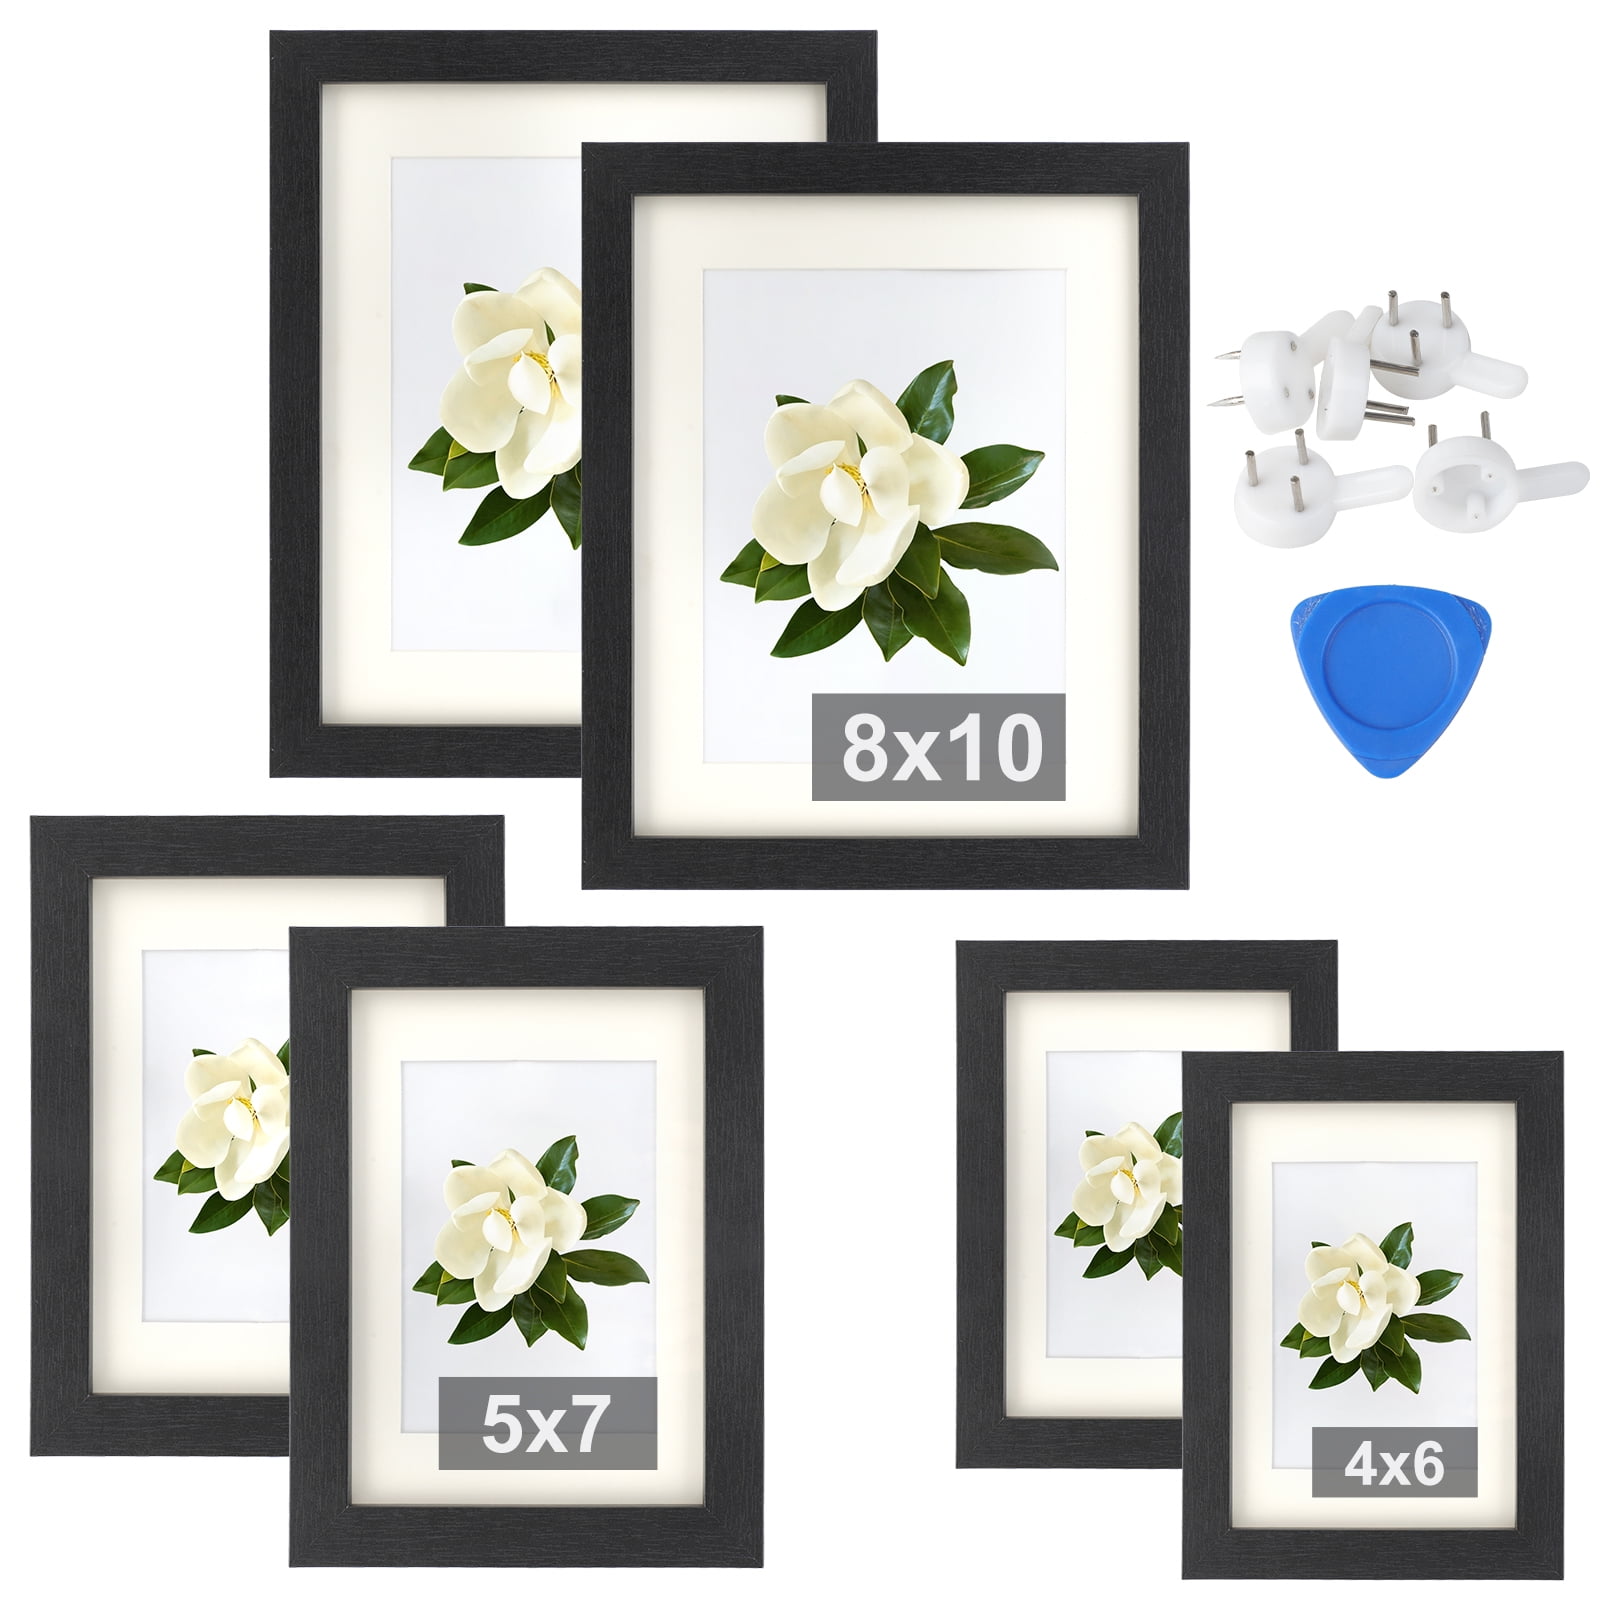 Details about   upsimples 5x7 Picture Frame Set of 10,Display Pictures 4x6 with Mat or 5x7 Wi... 